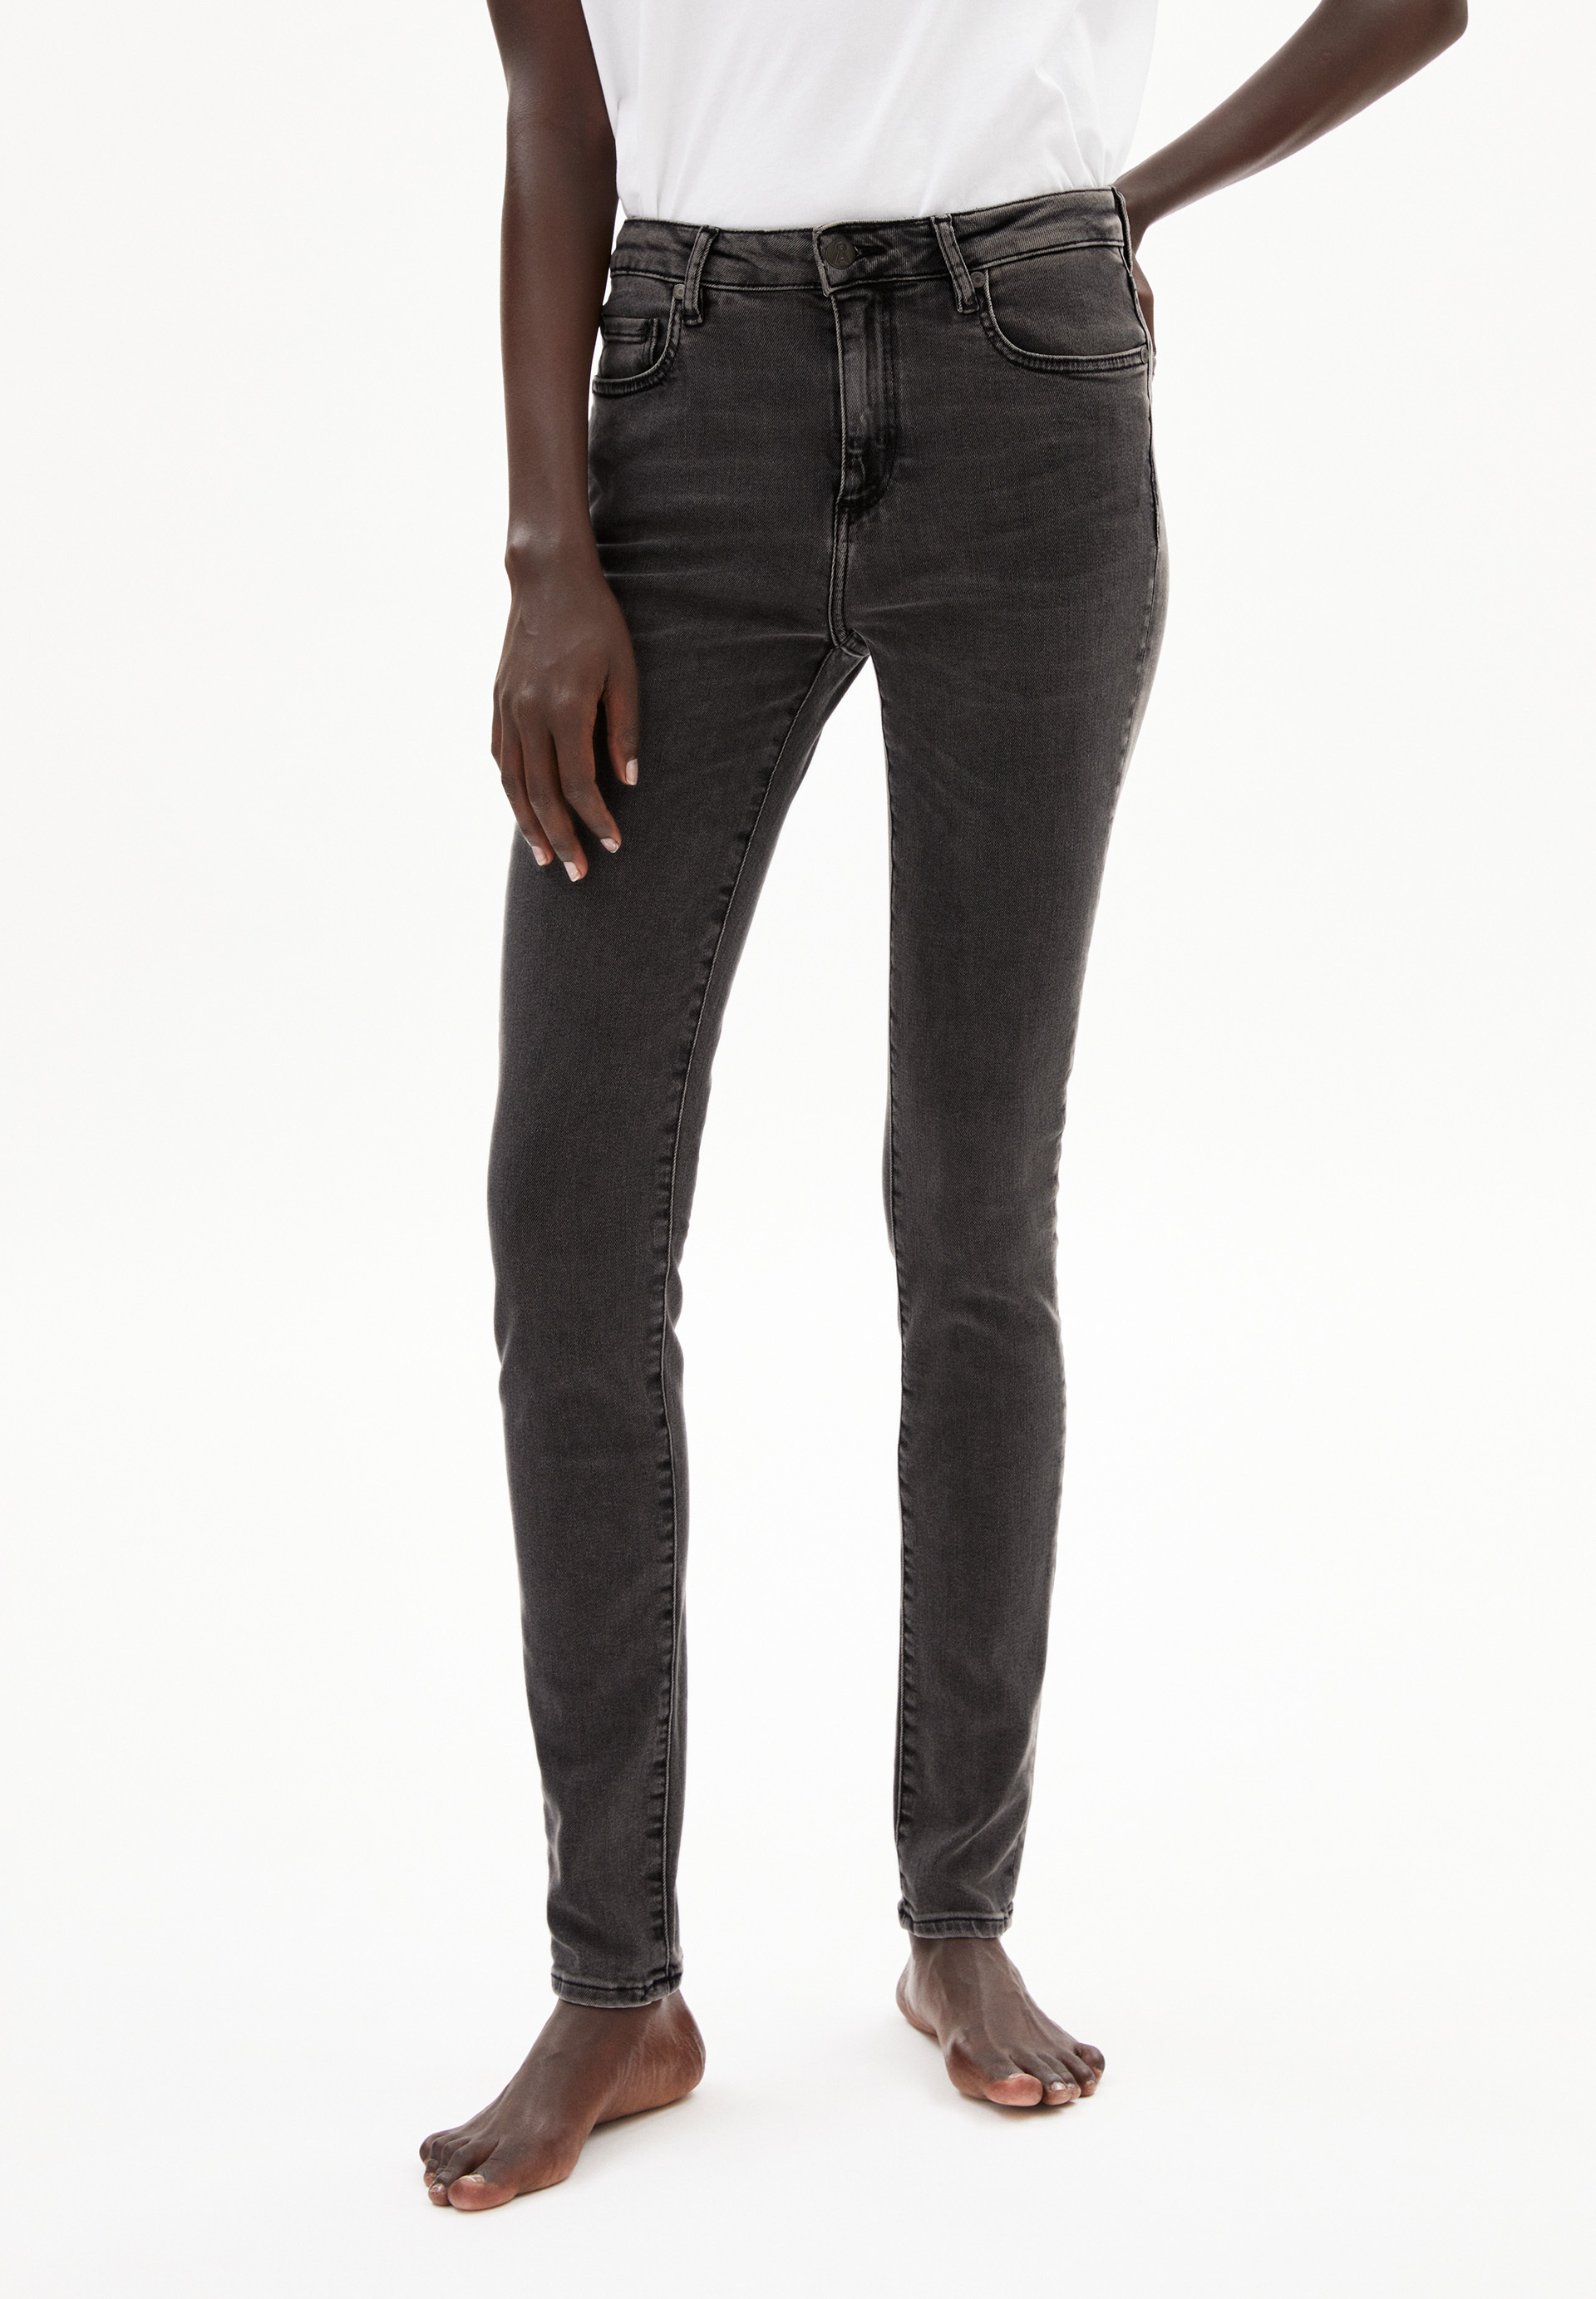 TILLAA X STRETCH Skinny Fit Mid Waist made of Organic Cotton Mix